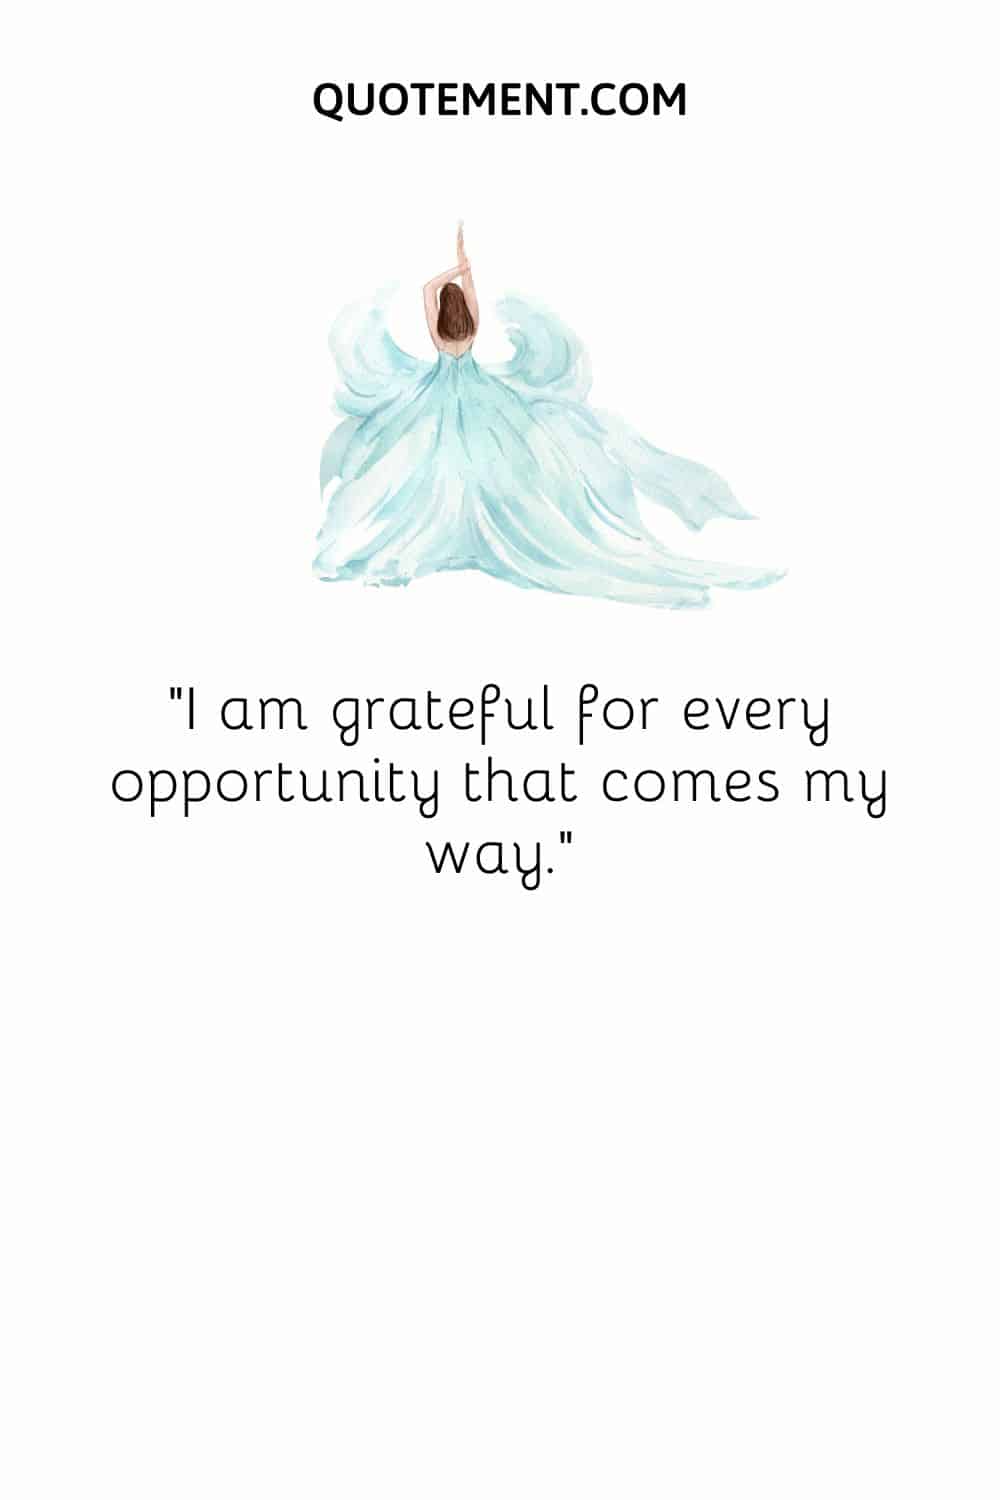 I am grateful for every opportunity that comes my way